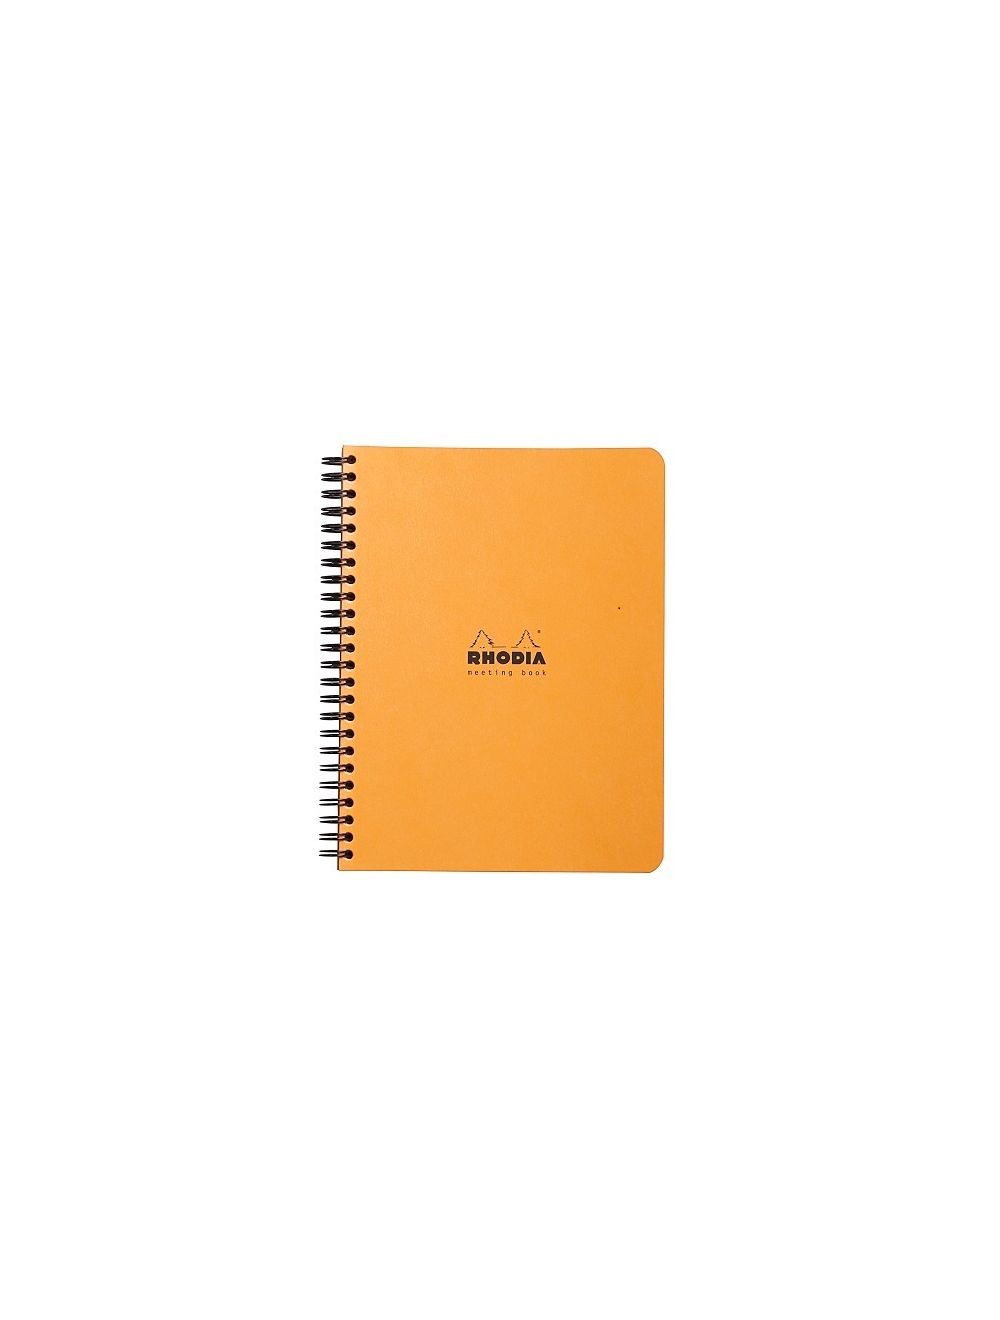 A5 Lined Spiral Meeting Book Softcover, RHODIA in Orange